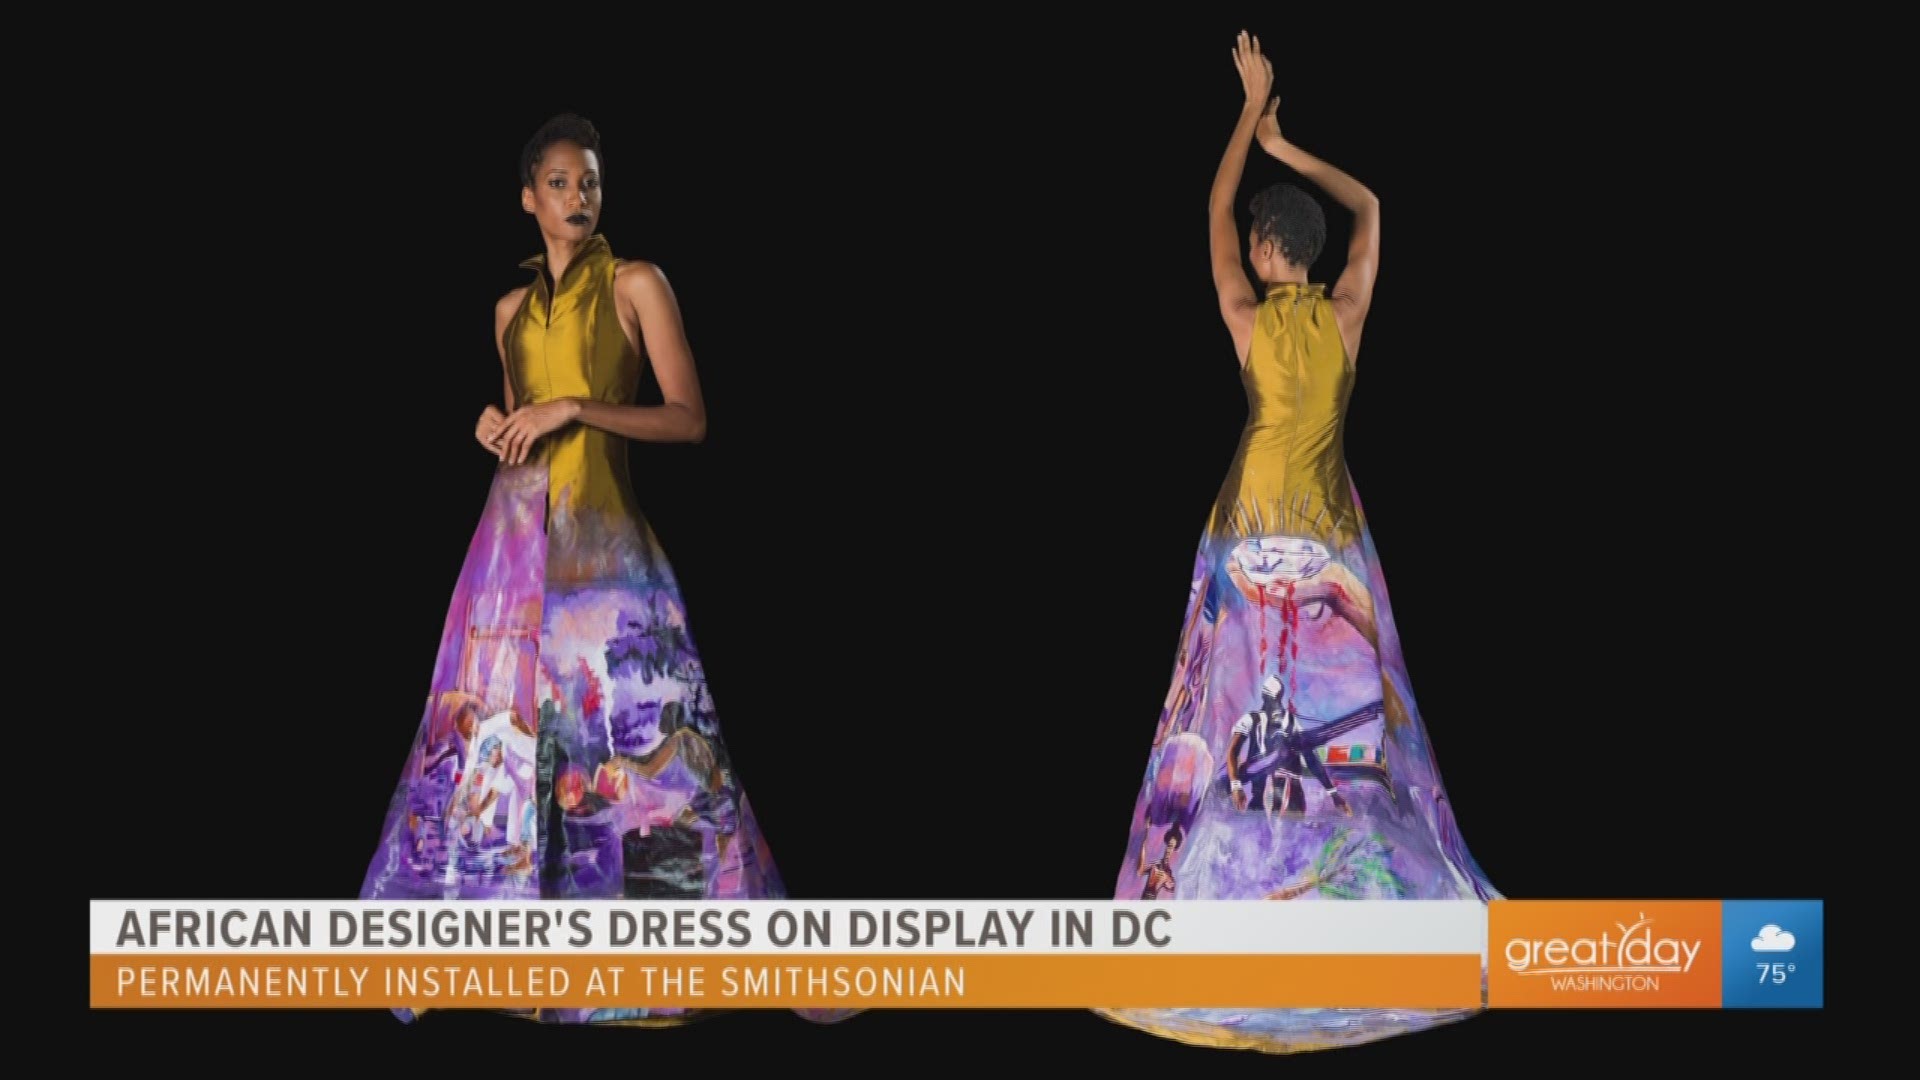 Internationally known Nigerian designer Patience Toleri displays her latest dress designs for us in the studio. One of Toleri's dresses, "The Esther Dress" recently earned a permanent spot in the Smithsonian National Museum of African Art.  Toleri is the first African designer to have a dress displayed permanently in one of the Smithsonian Museums.